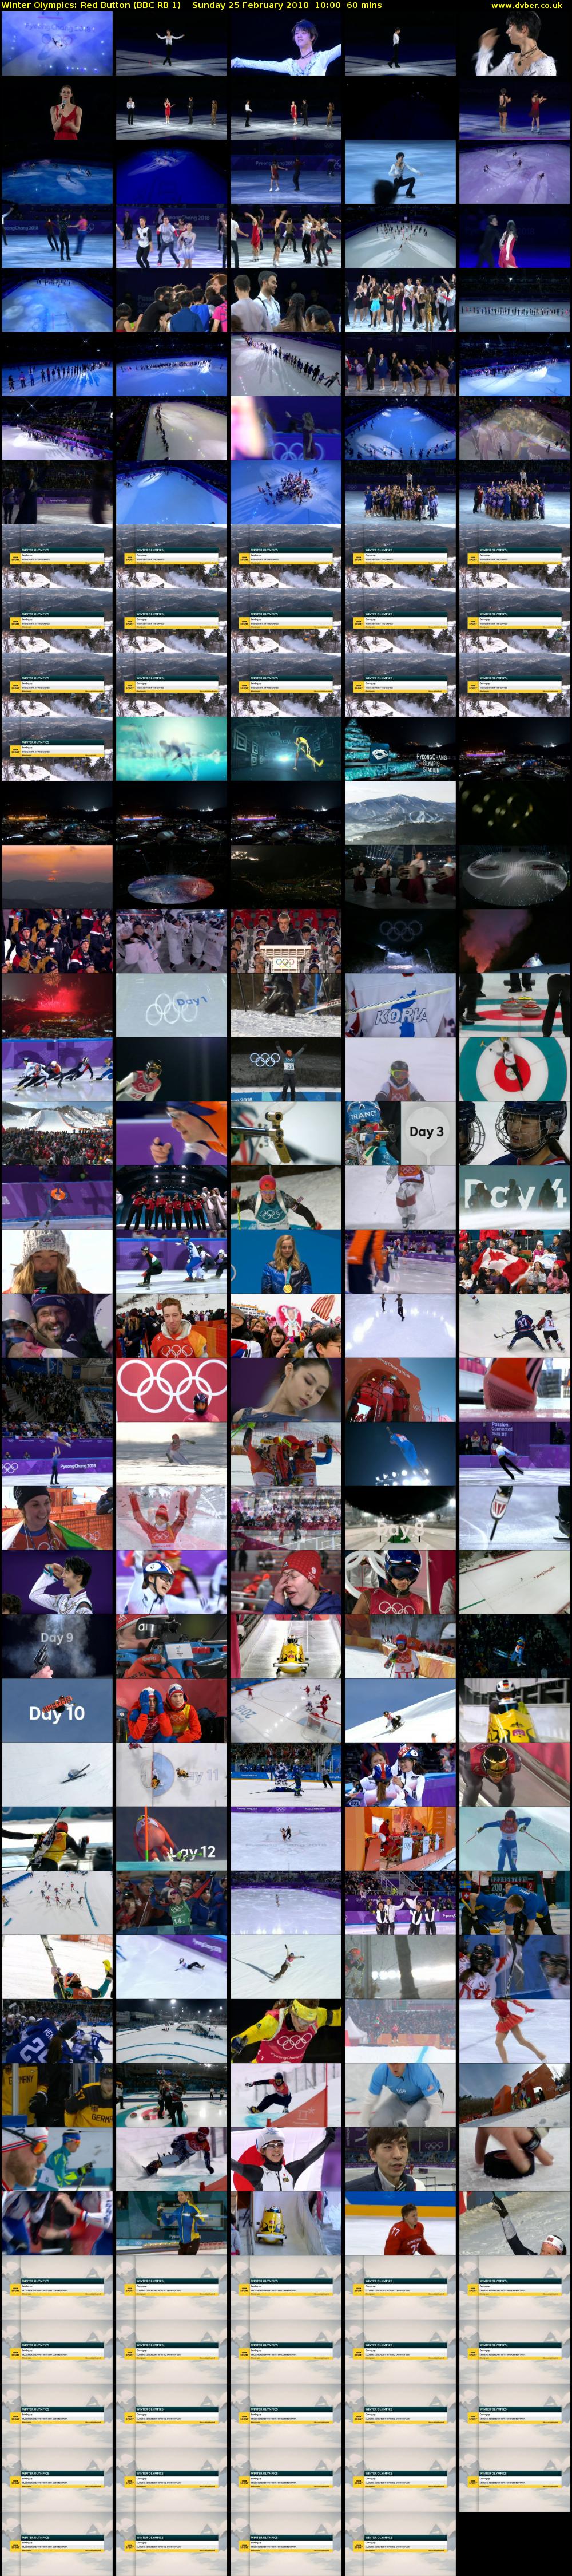 Winter Olympics: Red Button (BBC RB 1) Sunday 25 February 2018 10:00 - 11:00